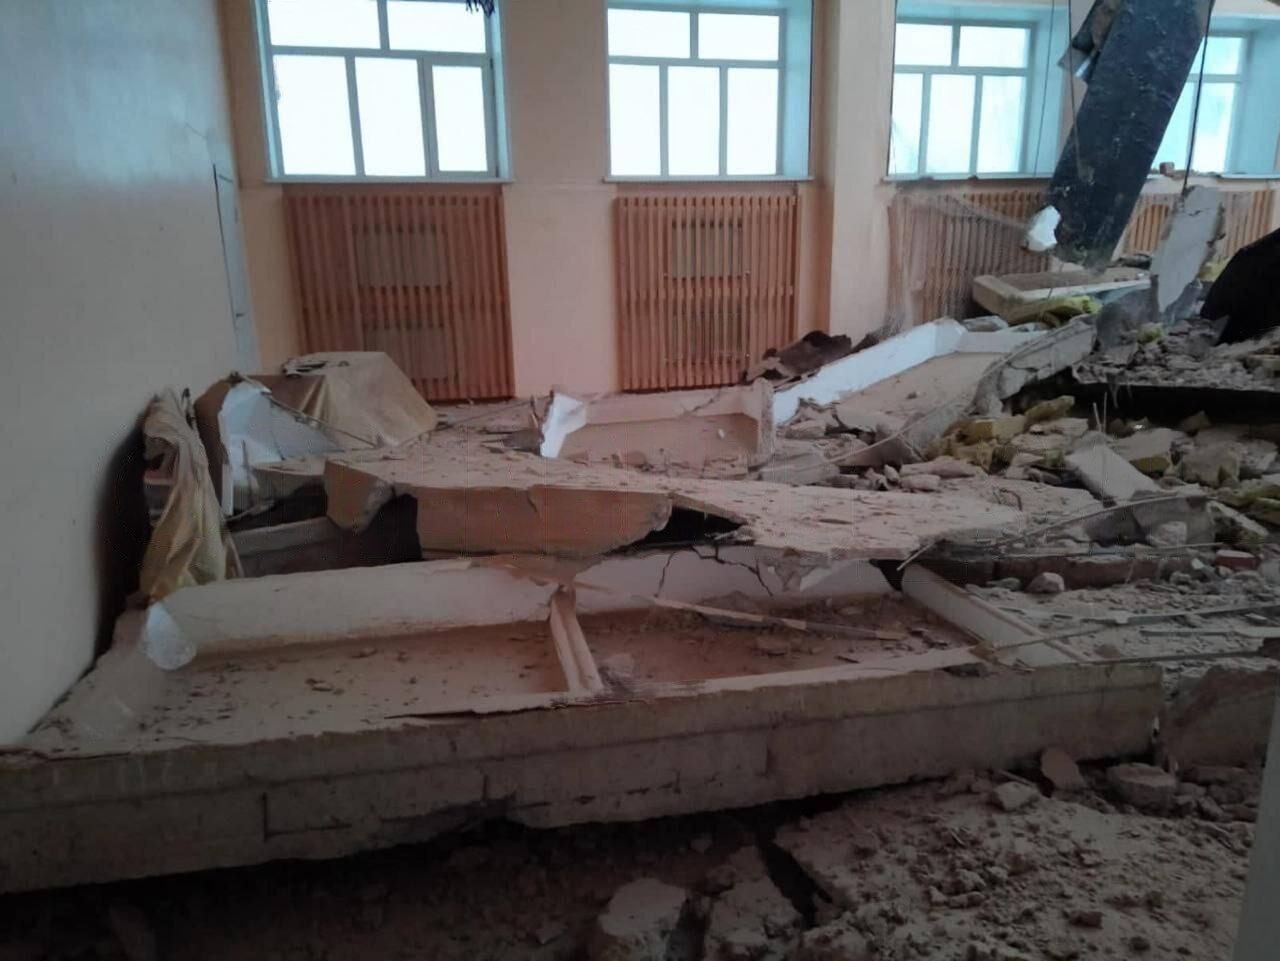 About 200 thousand without power, explosions in a support center and a school gym covered with snow: new disasters hit Russia